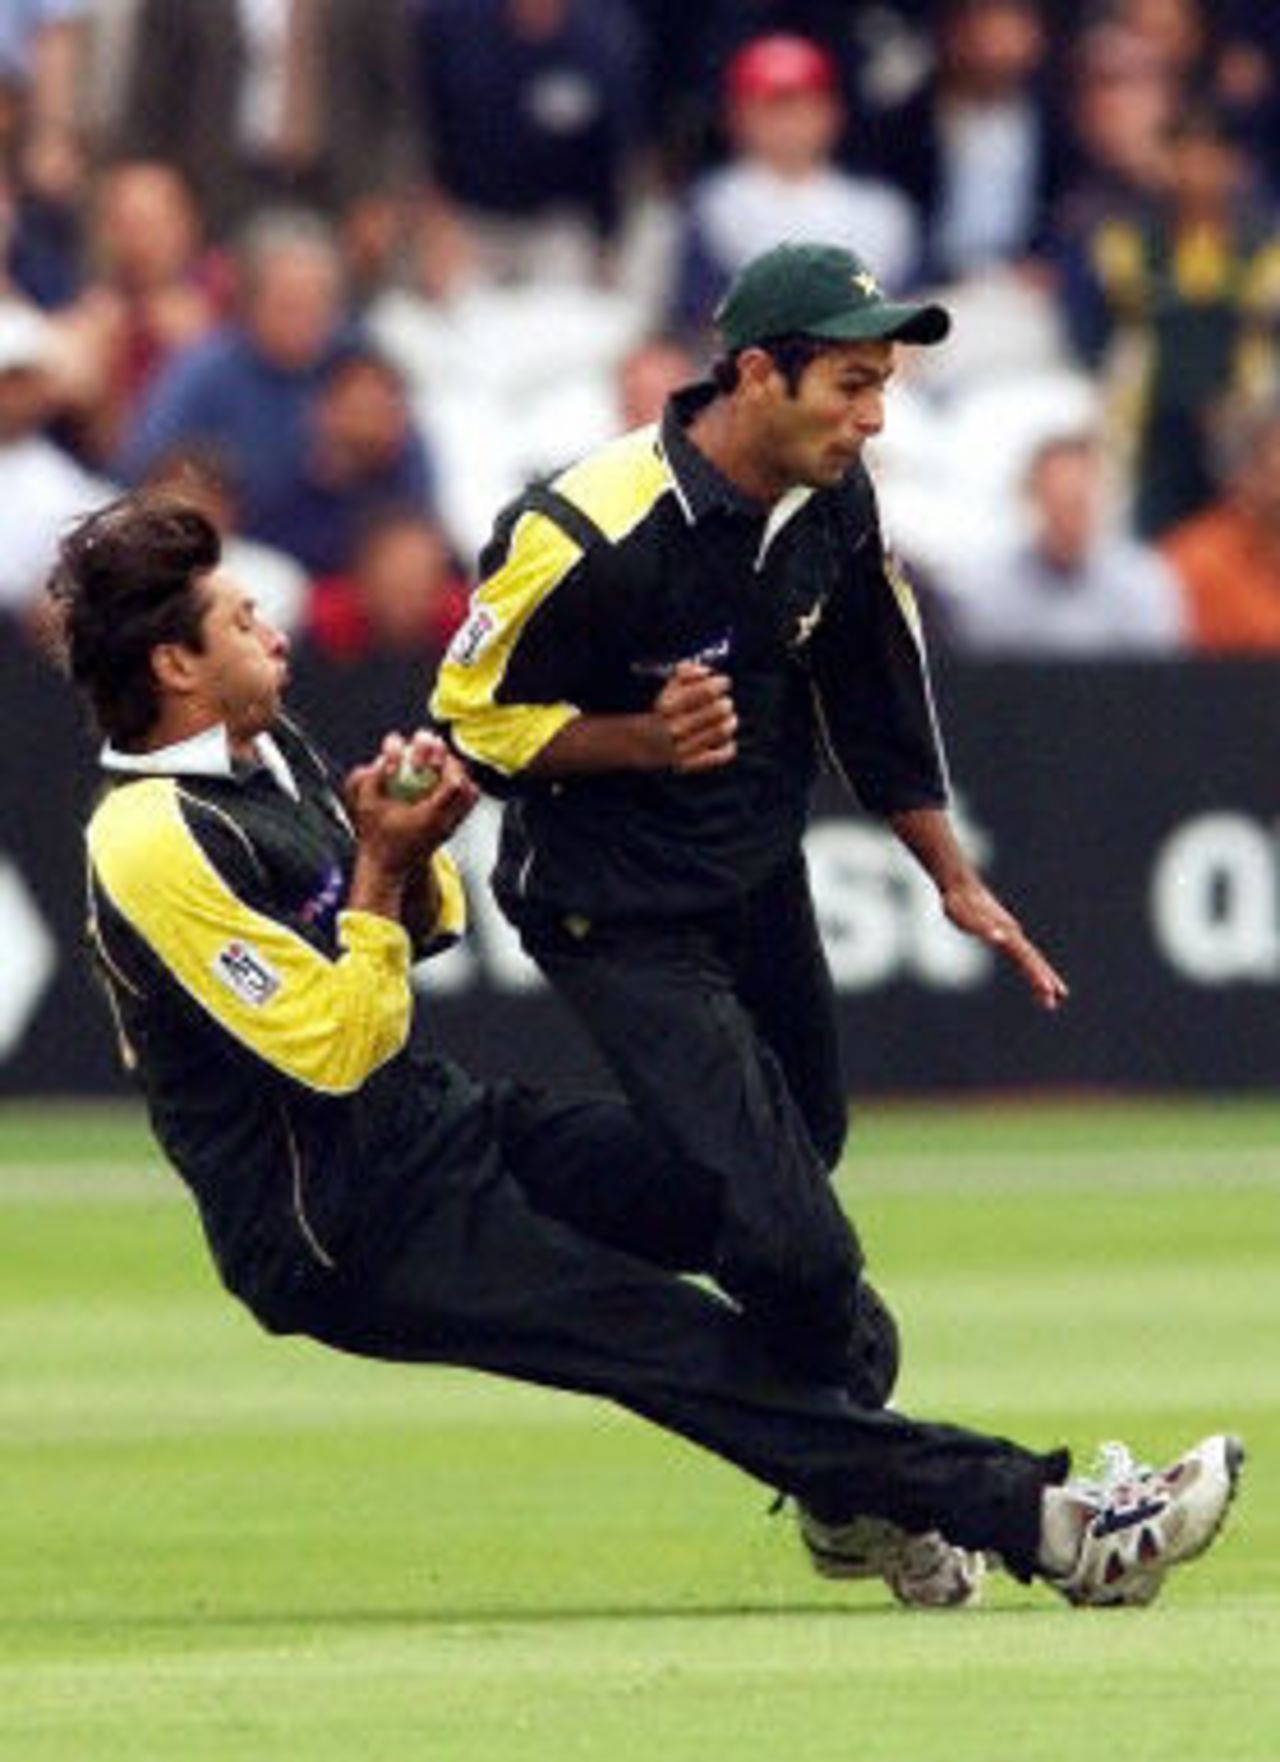 Shahid Afridi collides with Shoaib Malik while taking a sensational catch to dismiss Trescothick, 4th ODI at Lords, 12 June 2001.